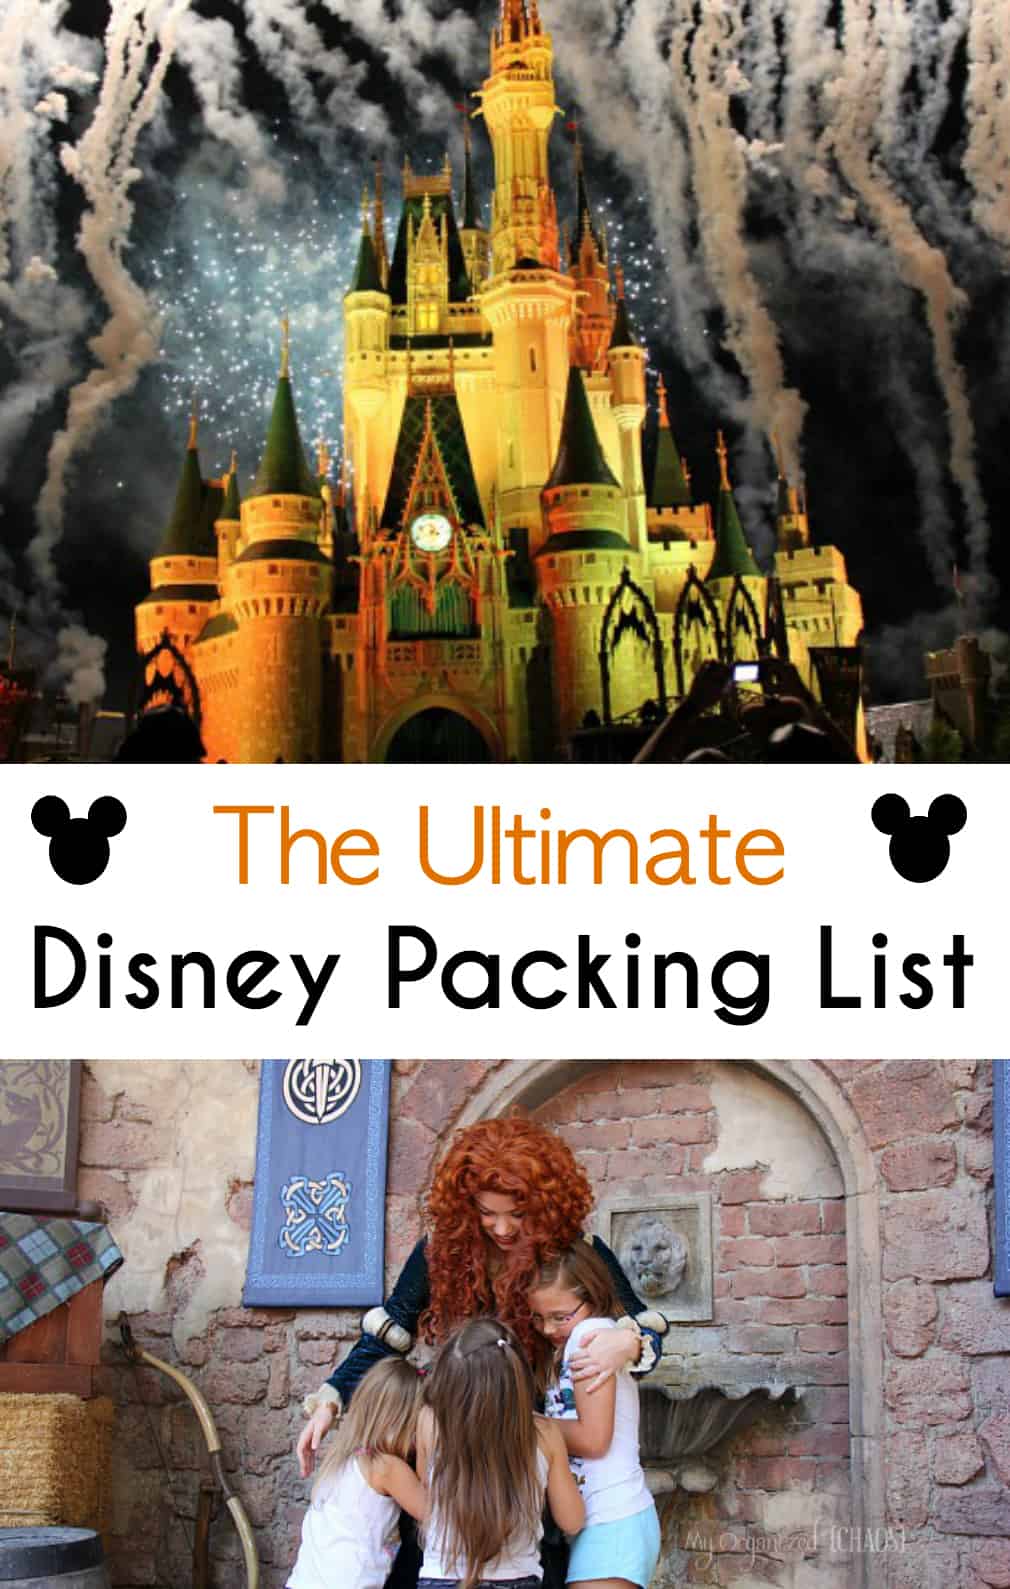 The Ultimate Disney Packing List